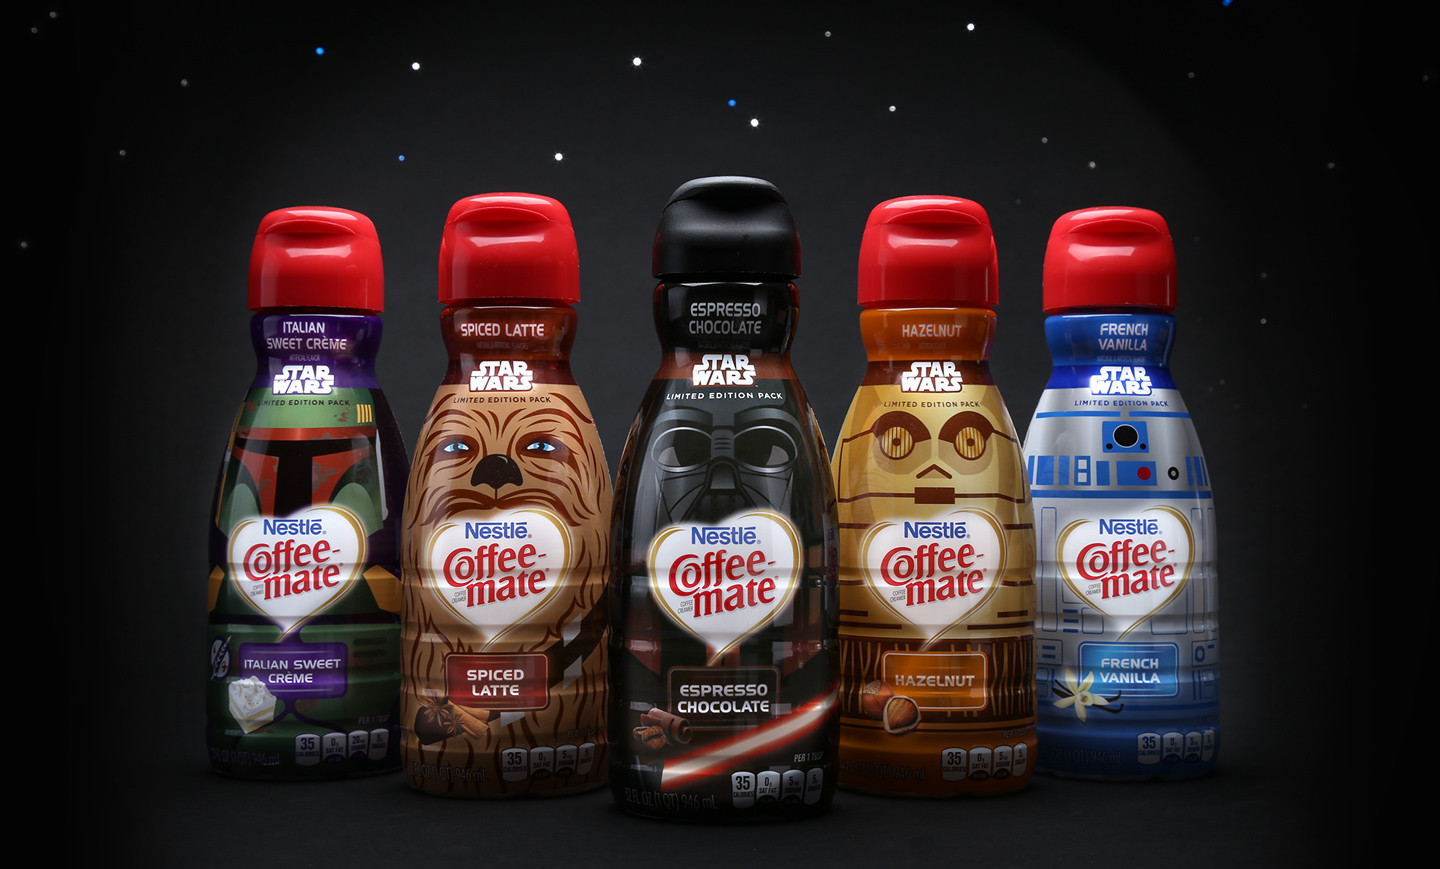 Chase Design Group – Coffee-mate Star Wars